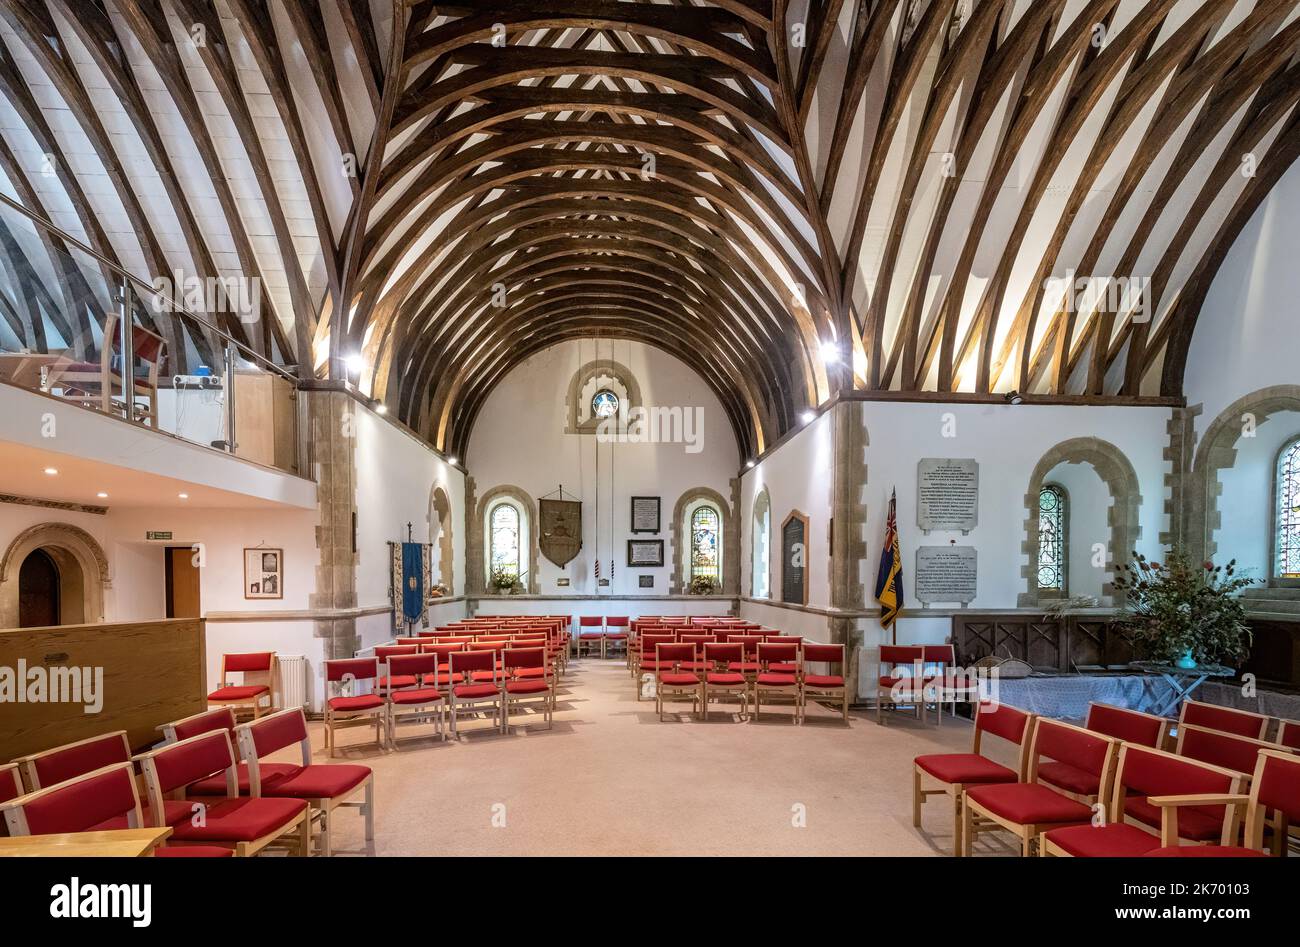 St John the Baptist Church in Itchen Abbas village, Hampshire, England, UK. View of the interior with barrel-vaulted roof. Stock Photo